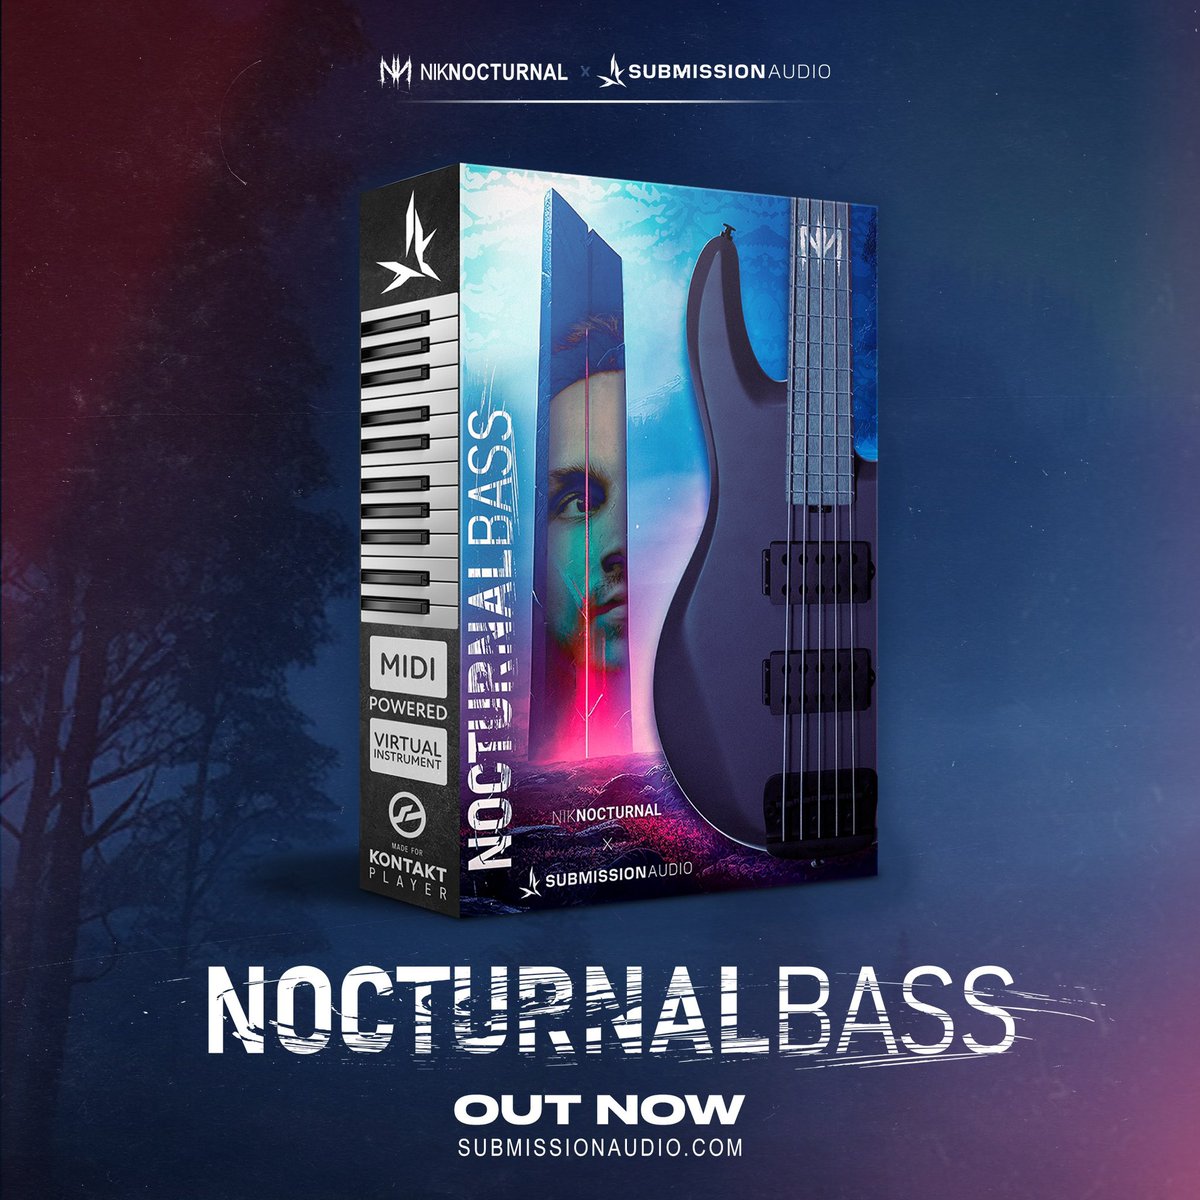 Start the year off right by making bass players extinct with my brand new signature bass plugin “Nocturnal Bass” from Submission Audio! Try it here: go.submissionaudio.com/NikNocturnal